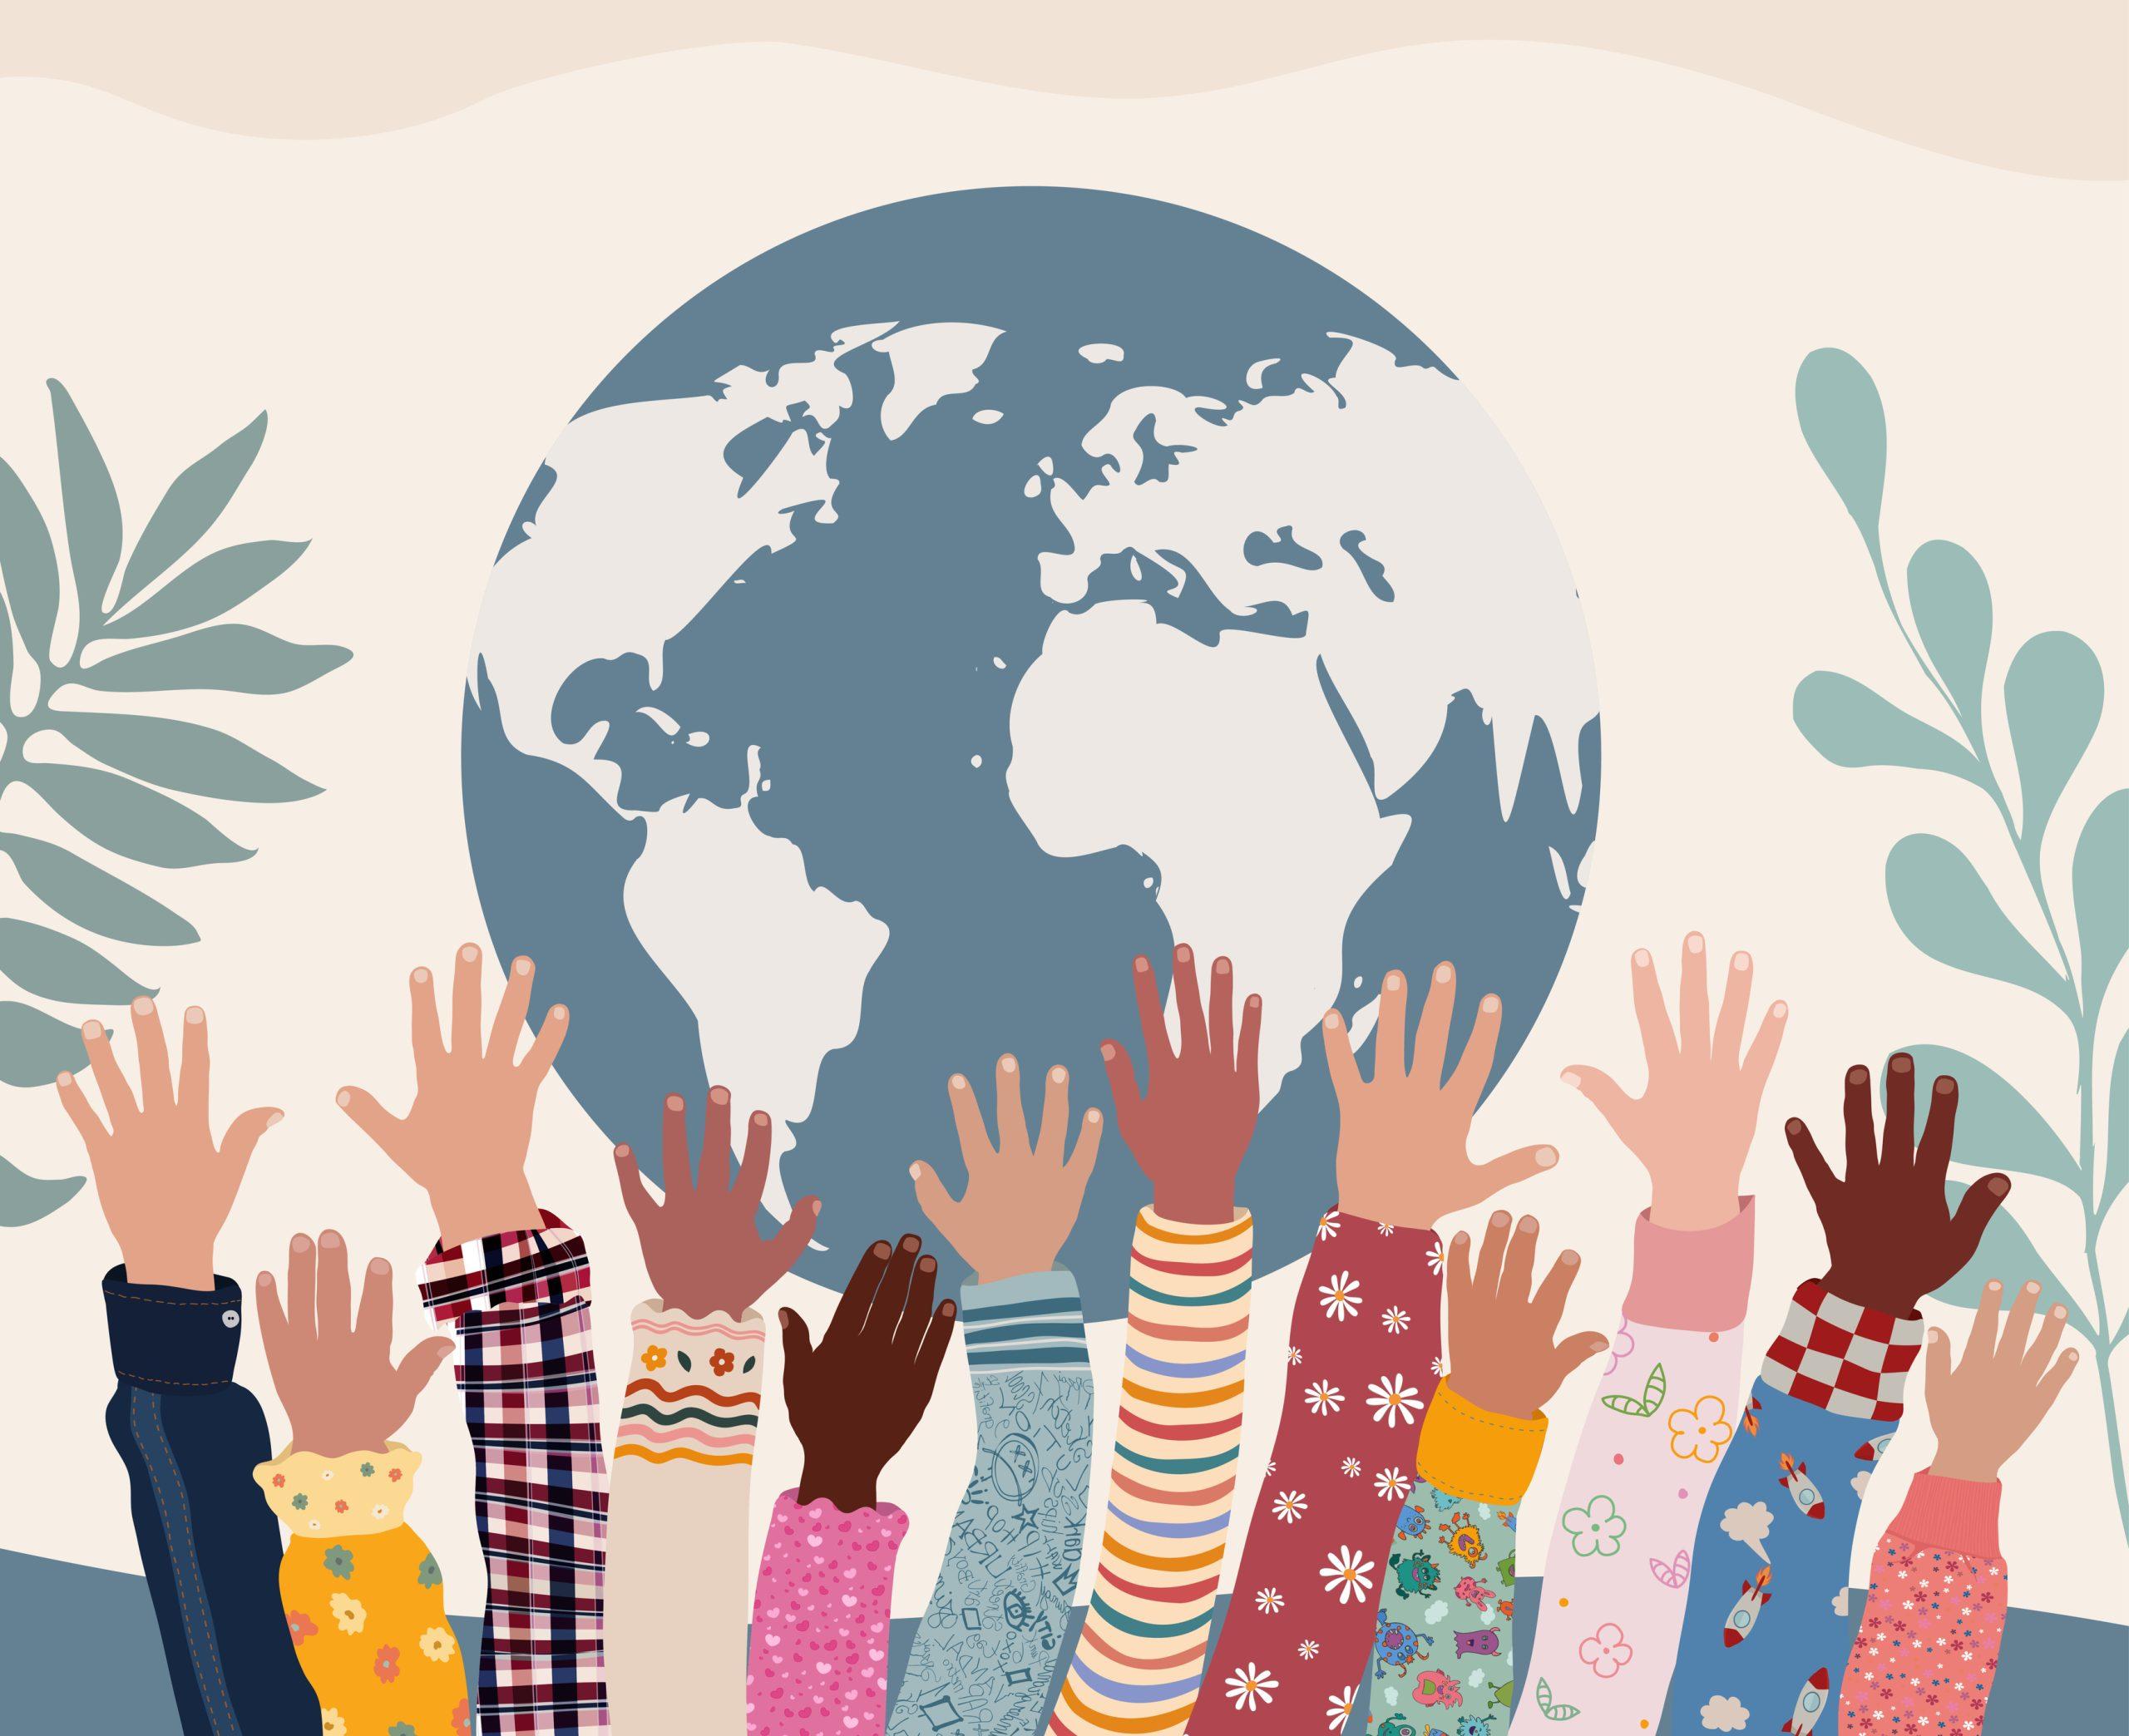 Raised hands and arms of children of different culture. Hands up of multi-ethnic and multicultural children. Concept of world peace, tolerance, brotherhood and friendship. Concept of ecological and clean environment. Save planet concept. Unity between various ethnic groups